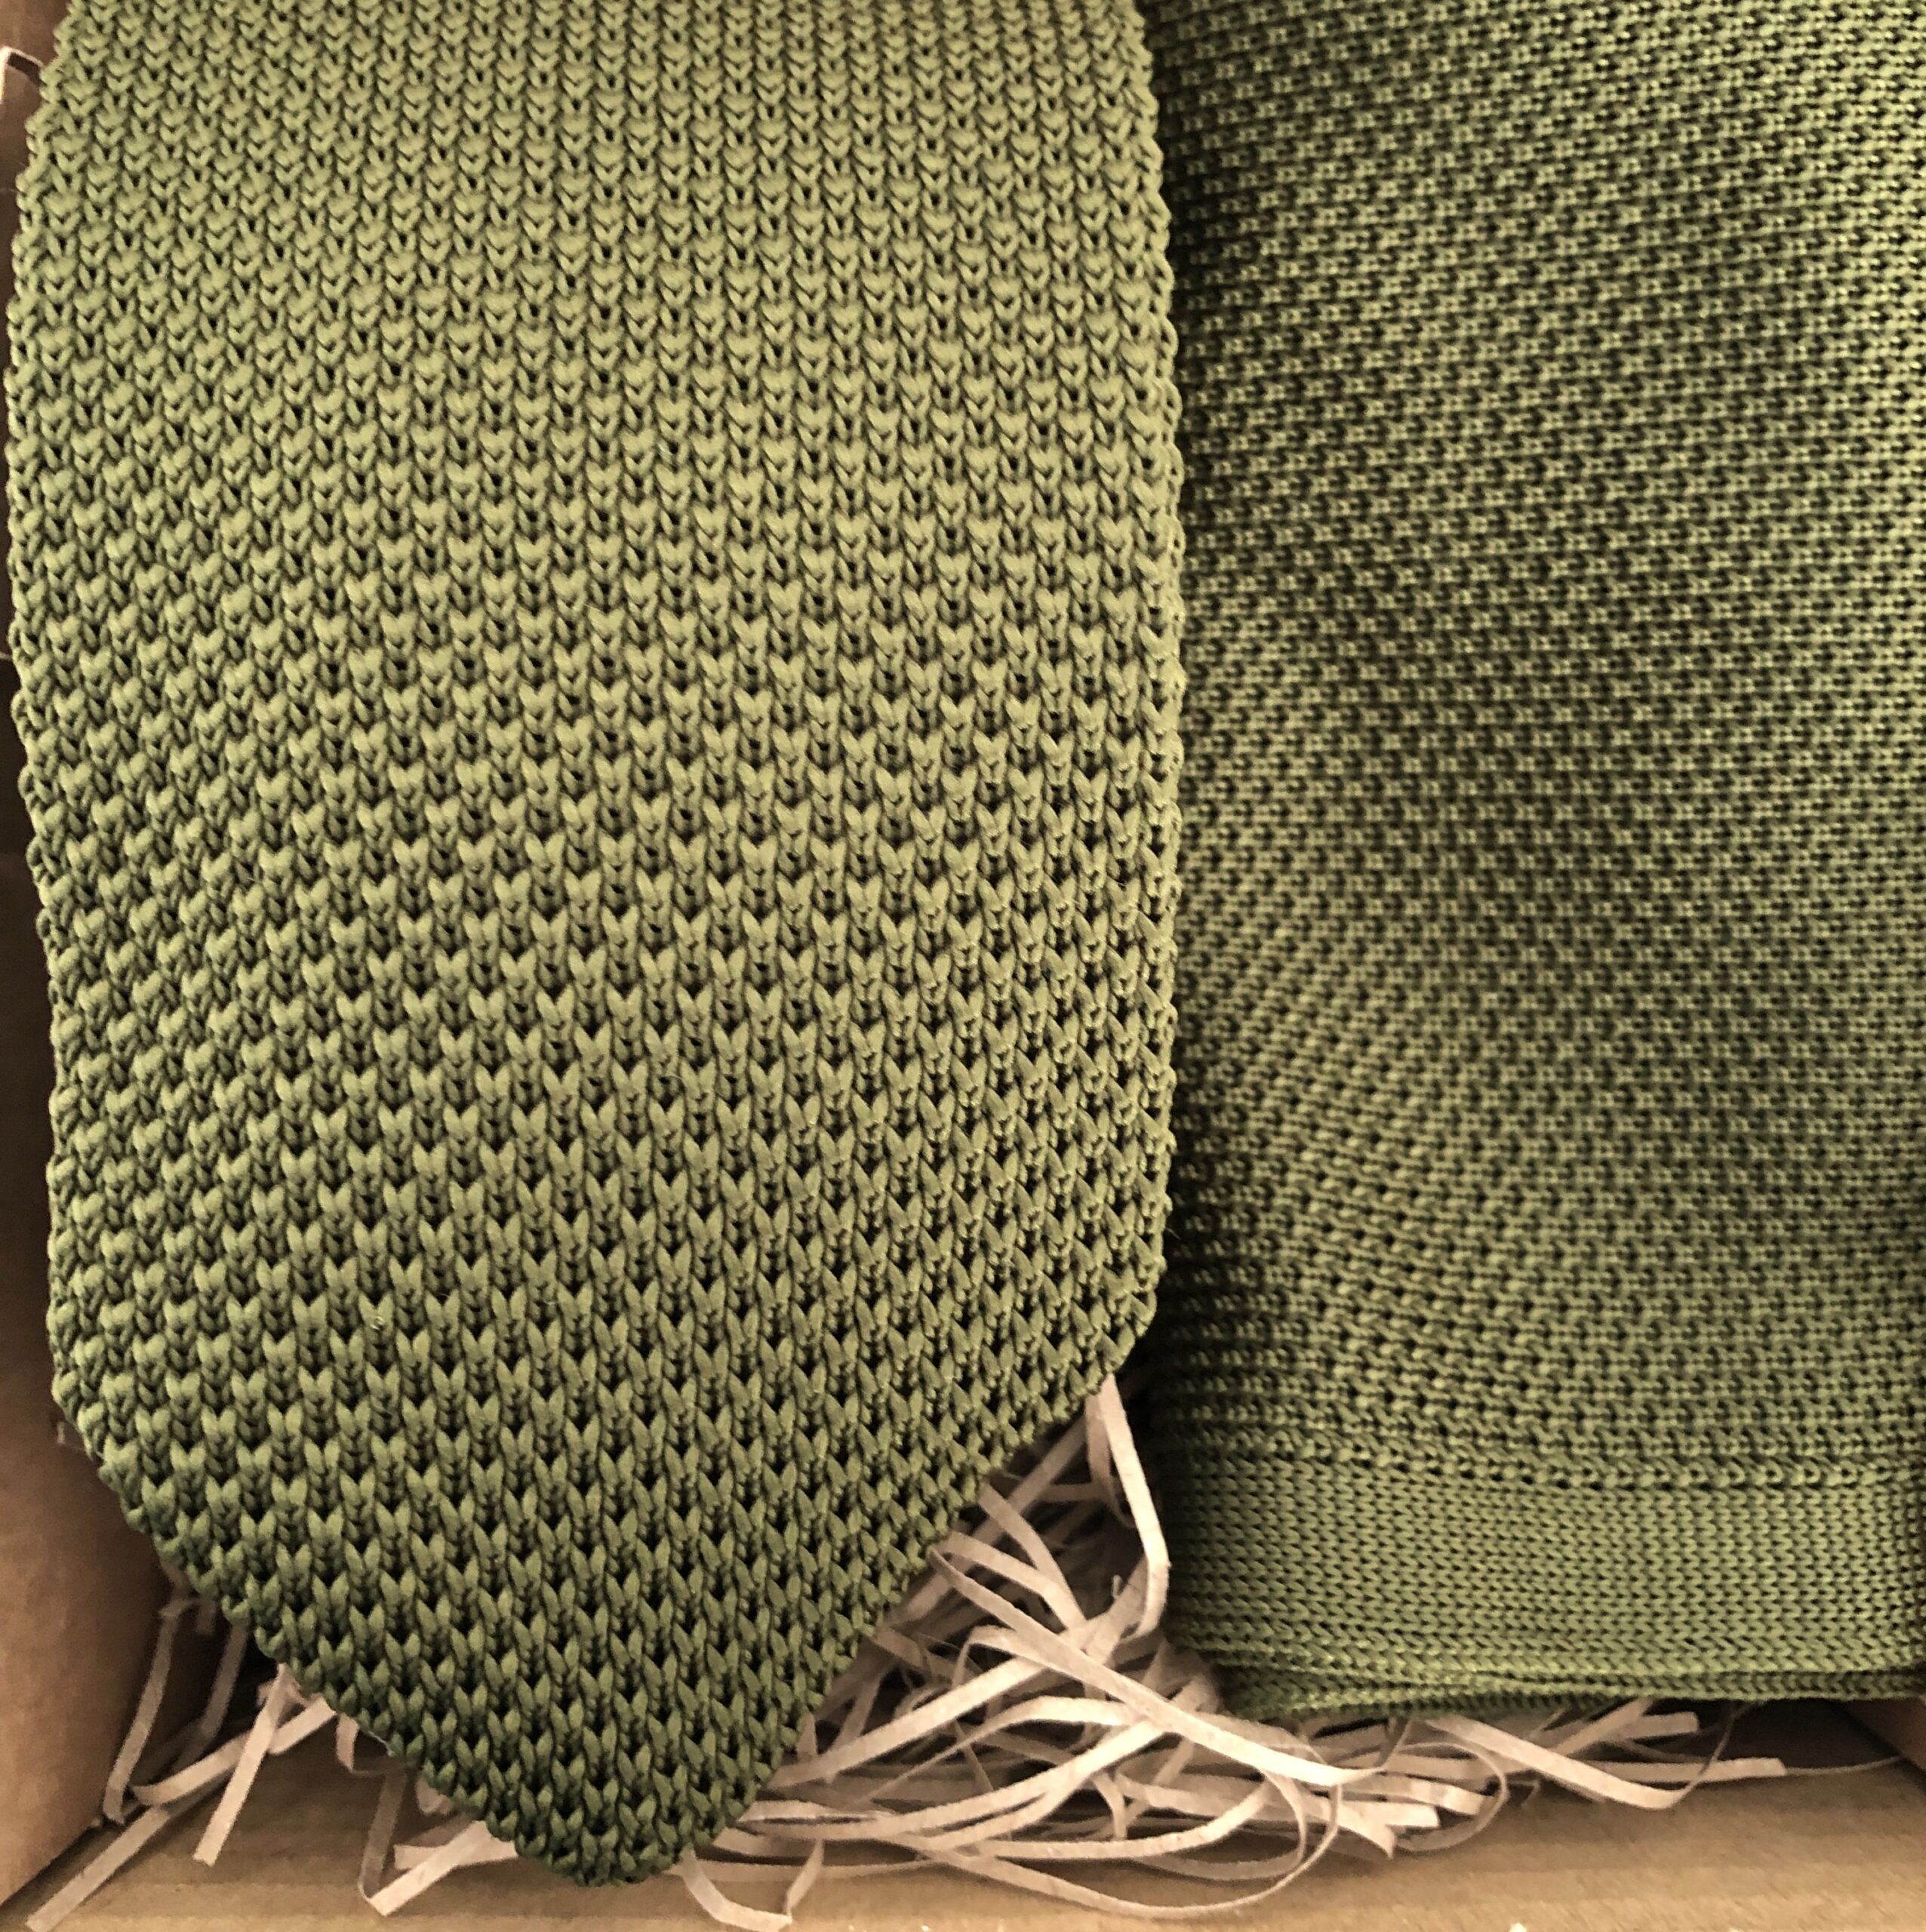 A photo of an olive green knit tie and pocket square for groomsmen